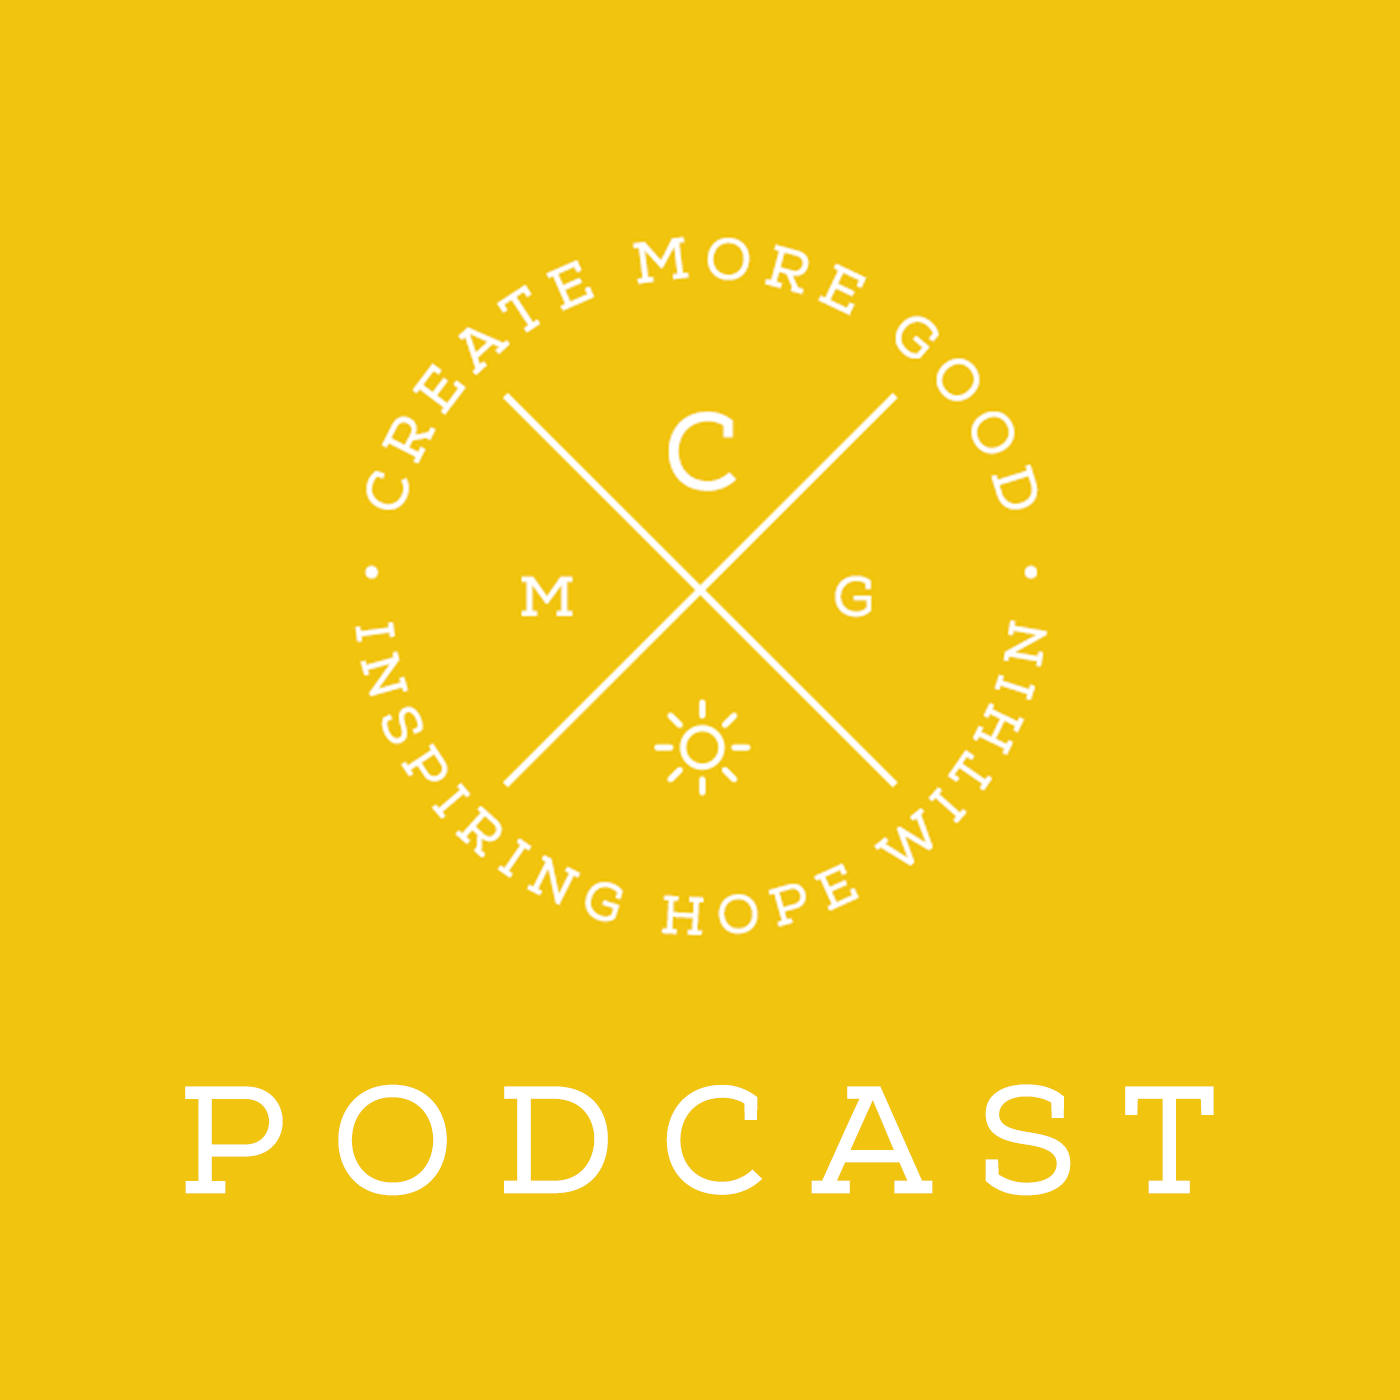 Create More Good Podcast